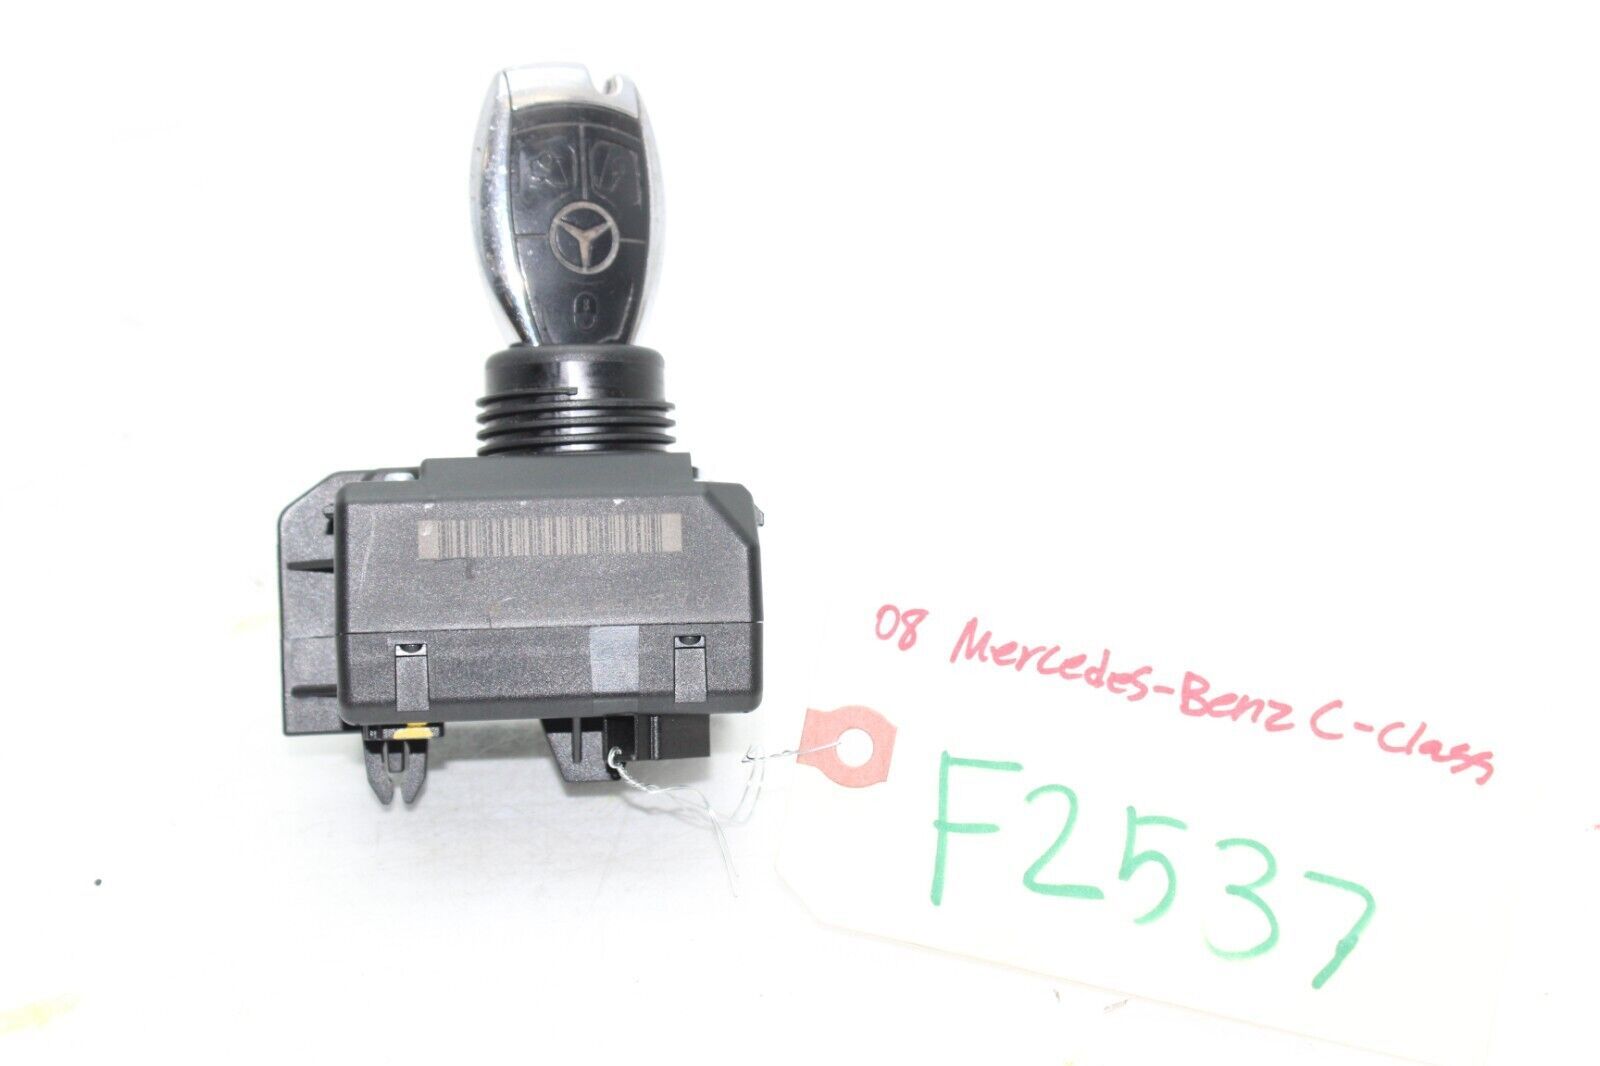 Primary image for 10-16 MERCEDES-BENZ C-CLASS Ignition Switch Module W/ Key F2537